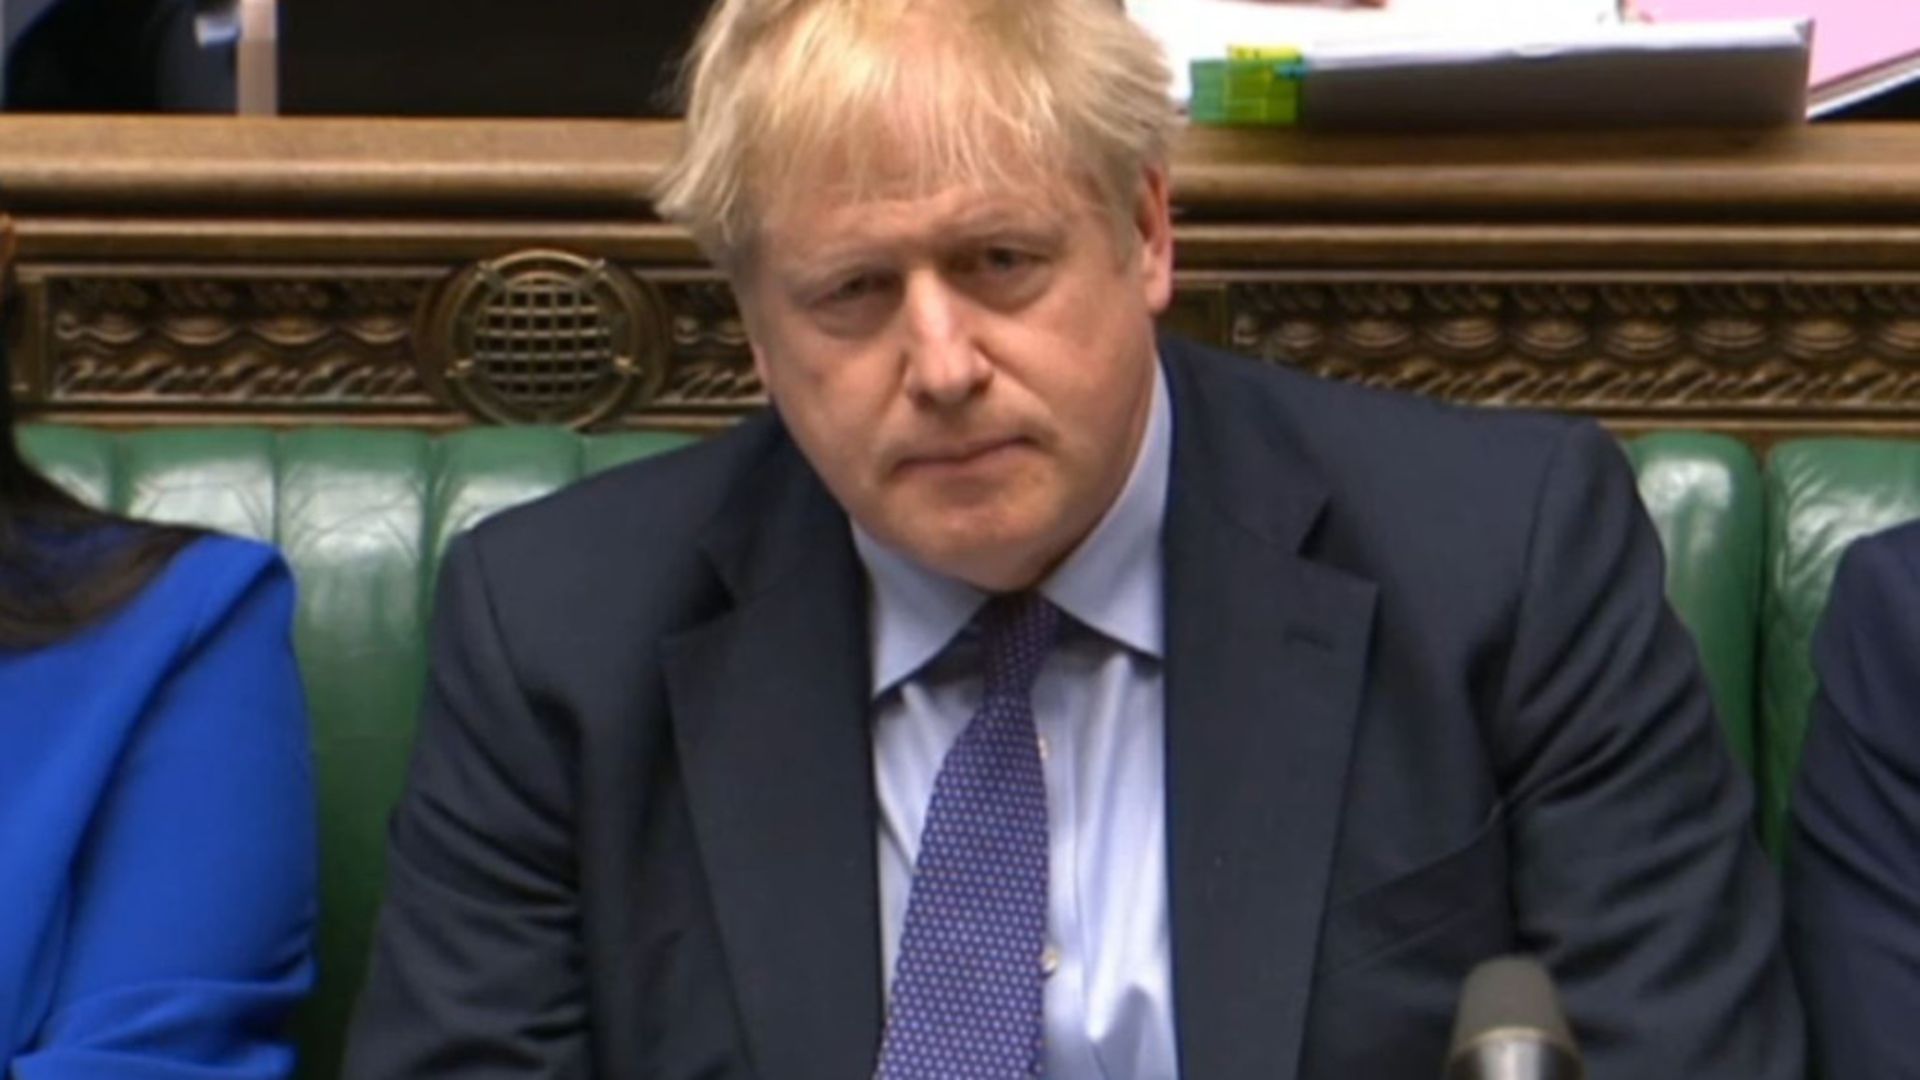 Prime Minister Boris Johnson listens in the House of Commons - Credit: PA